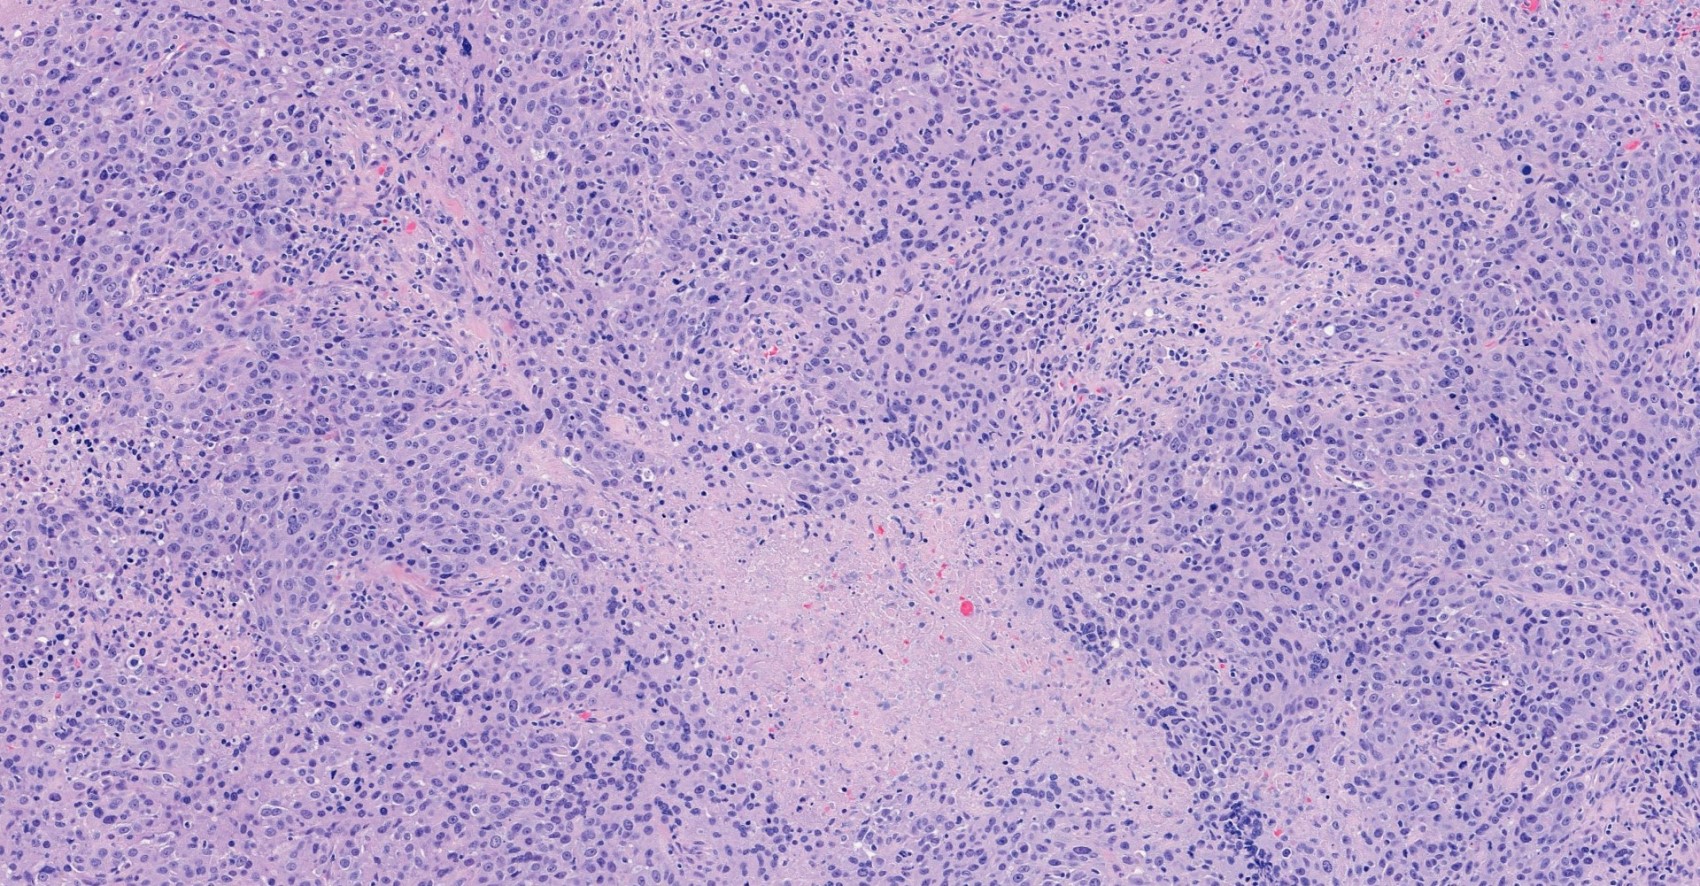 Invasive ductal carcinoma with necrosis, grade 3